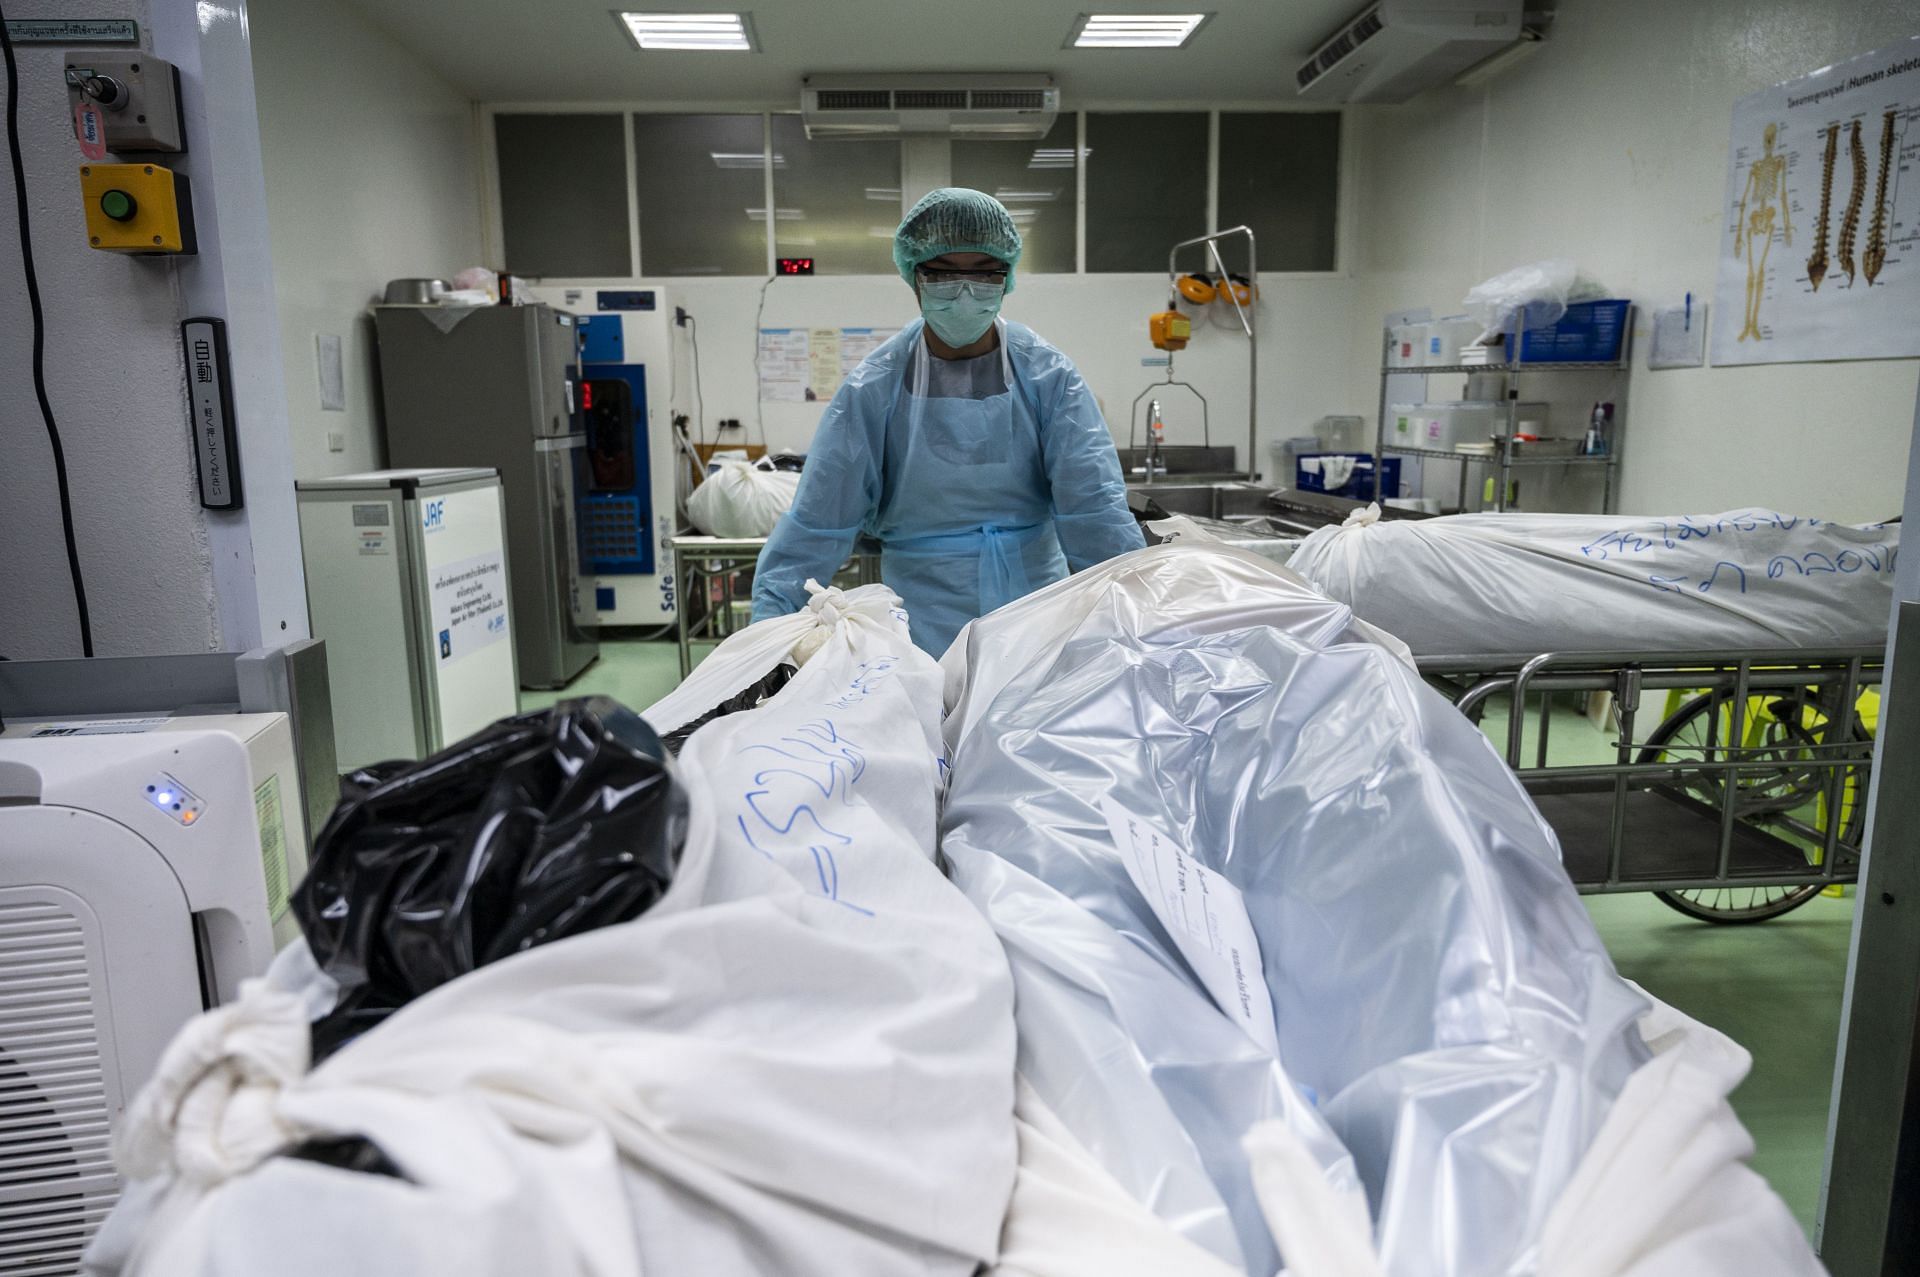 A representative image of the hospital where the post-mortem of the couple was carried out (Image via Getty)